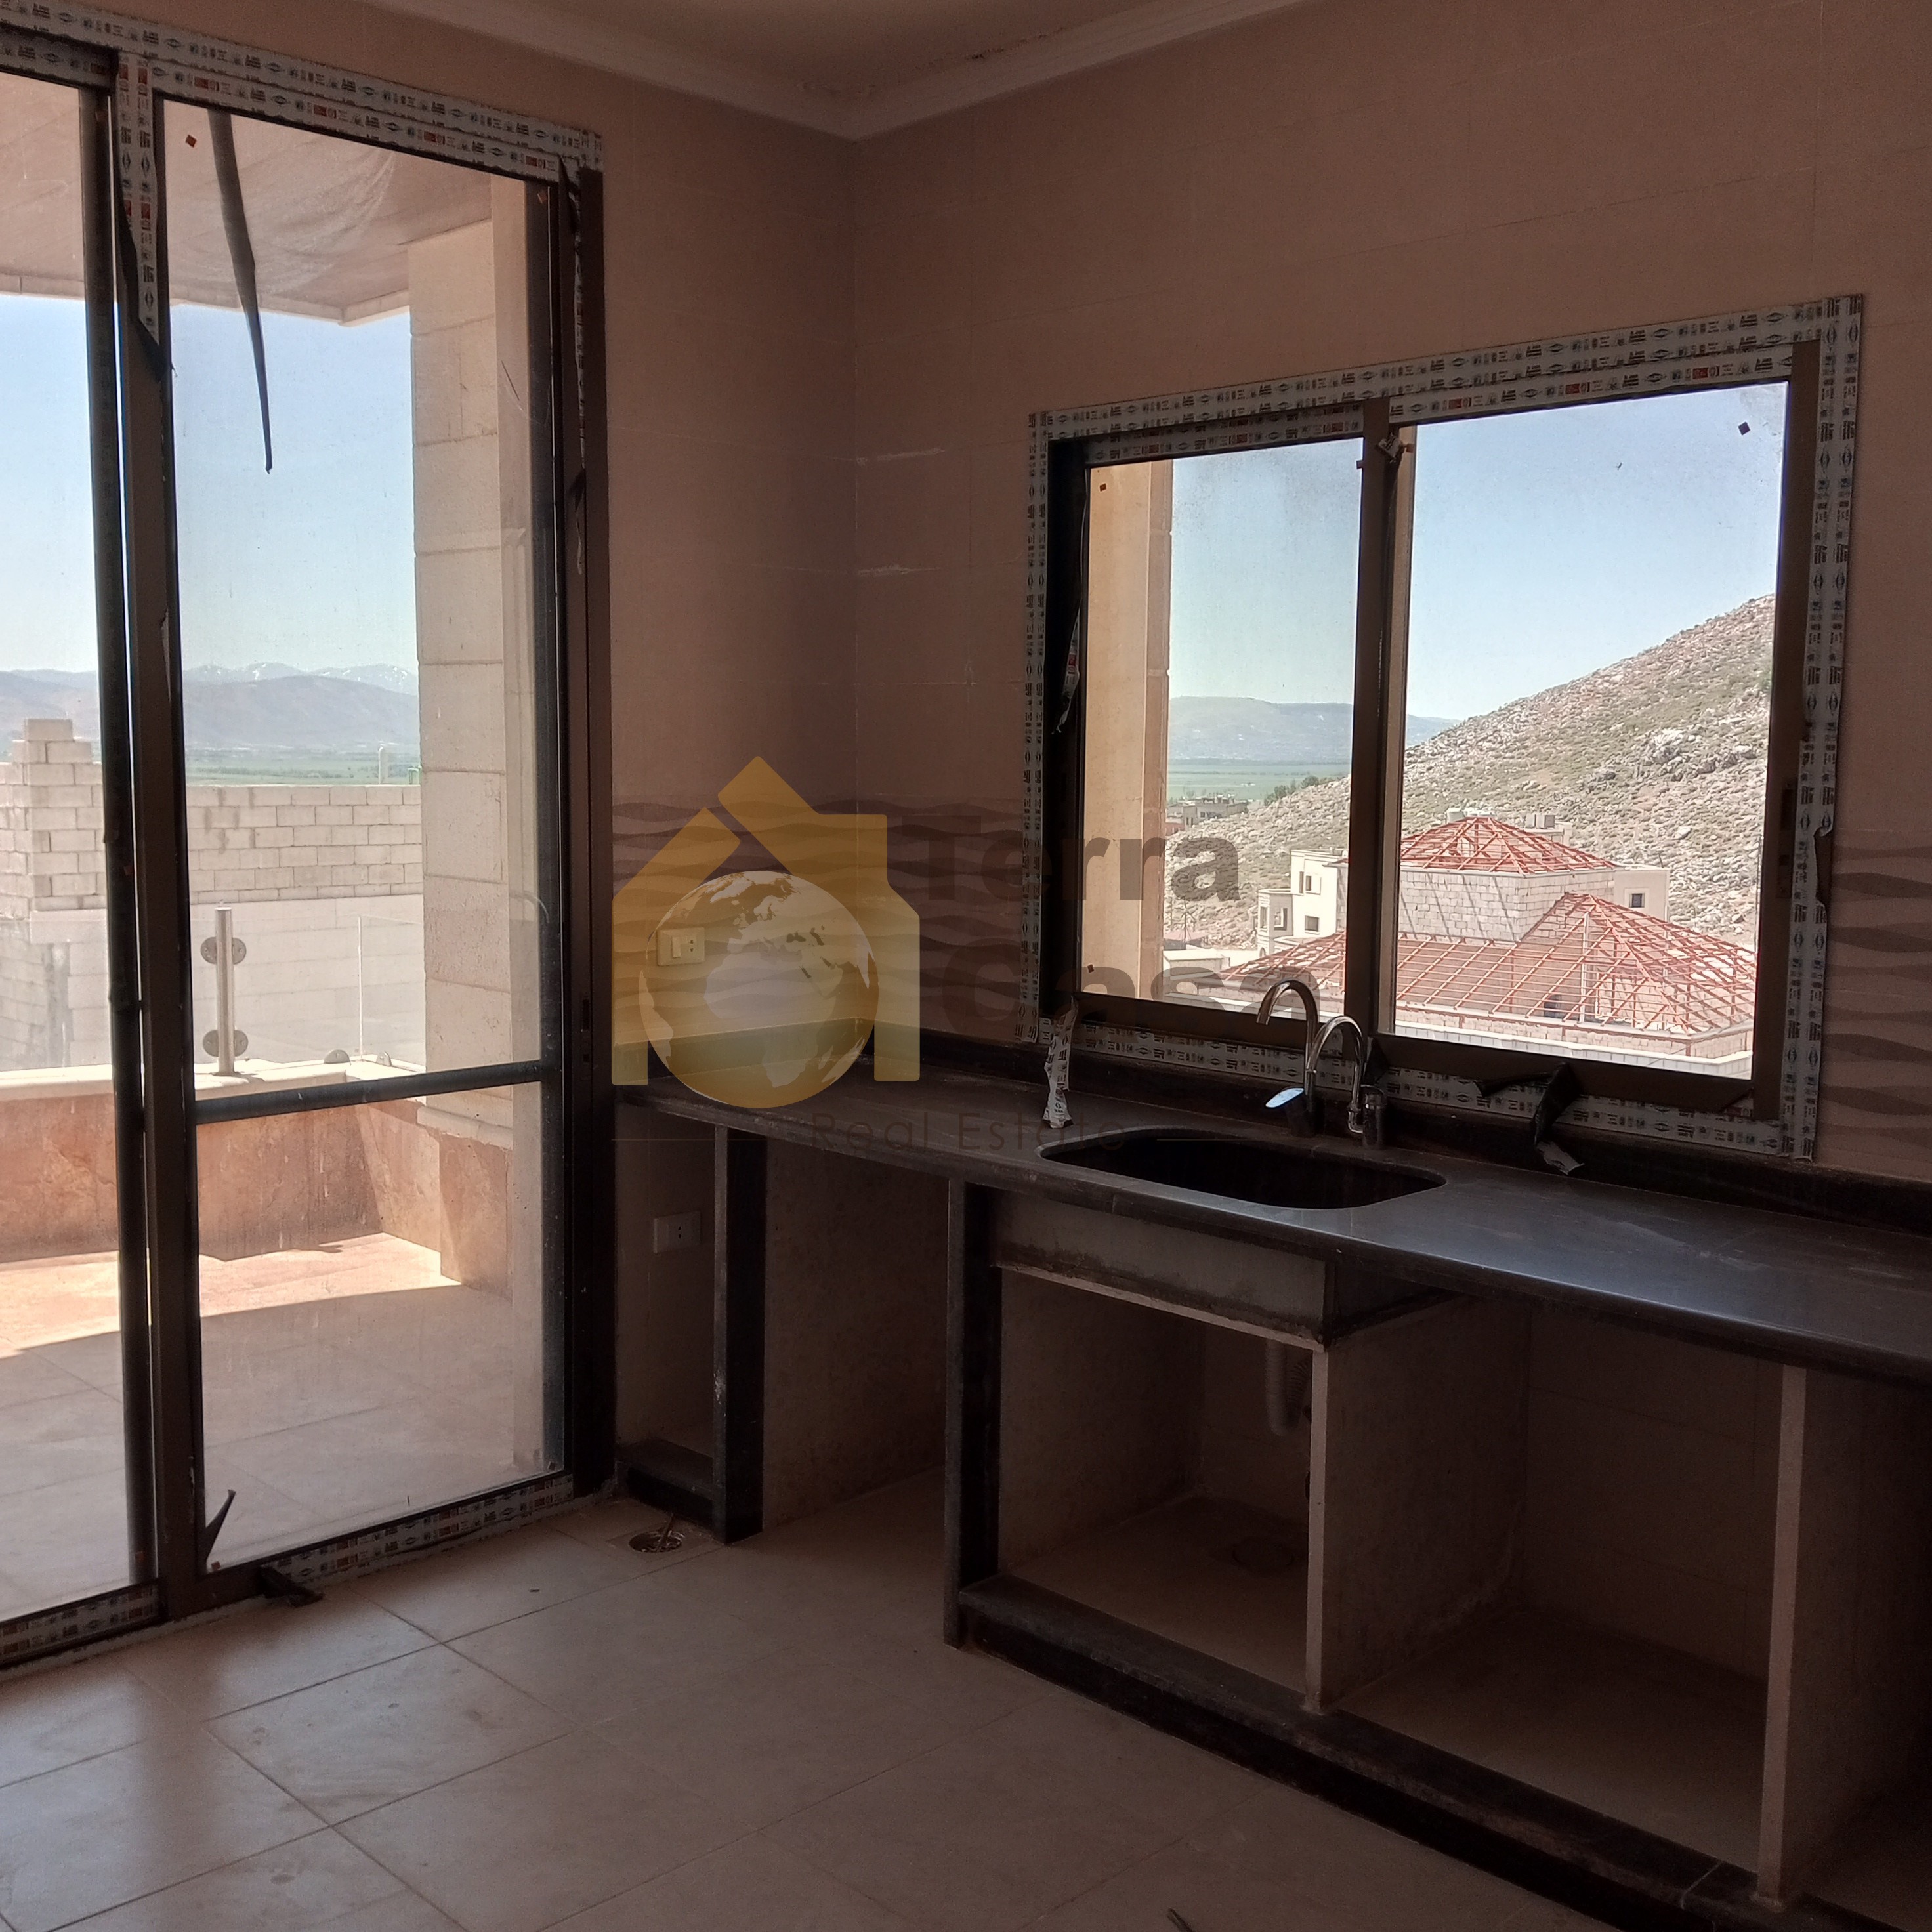 Apartment for sale in zahle qoub elias  brand new. Ref#997